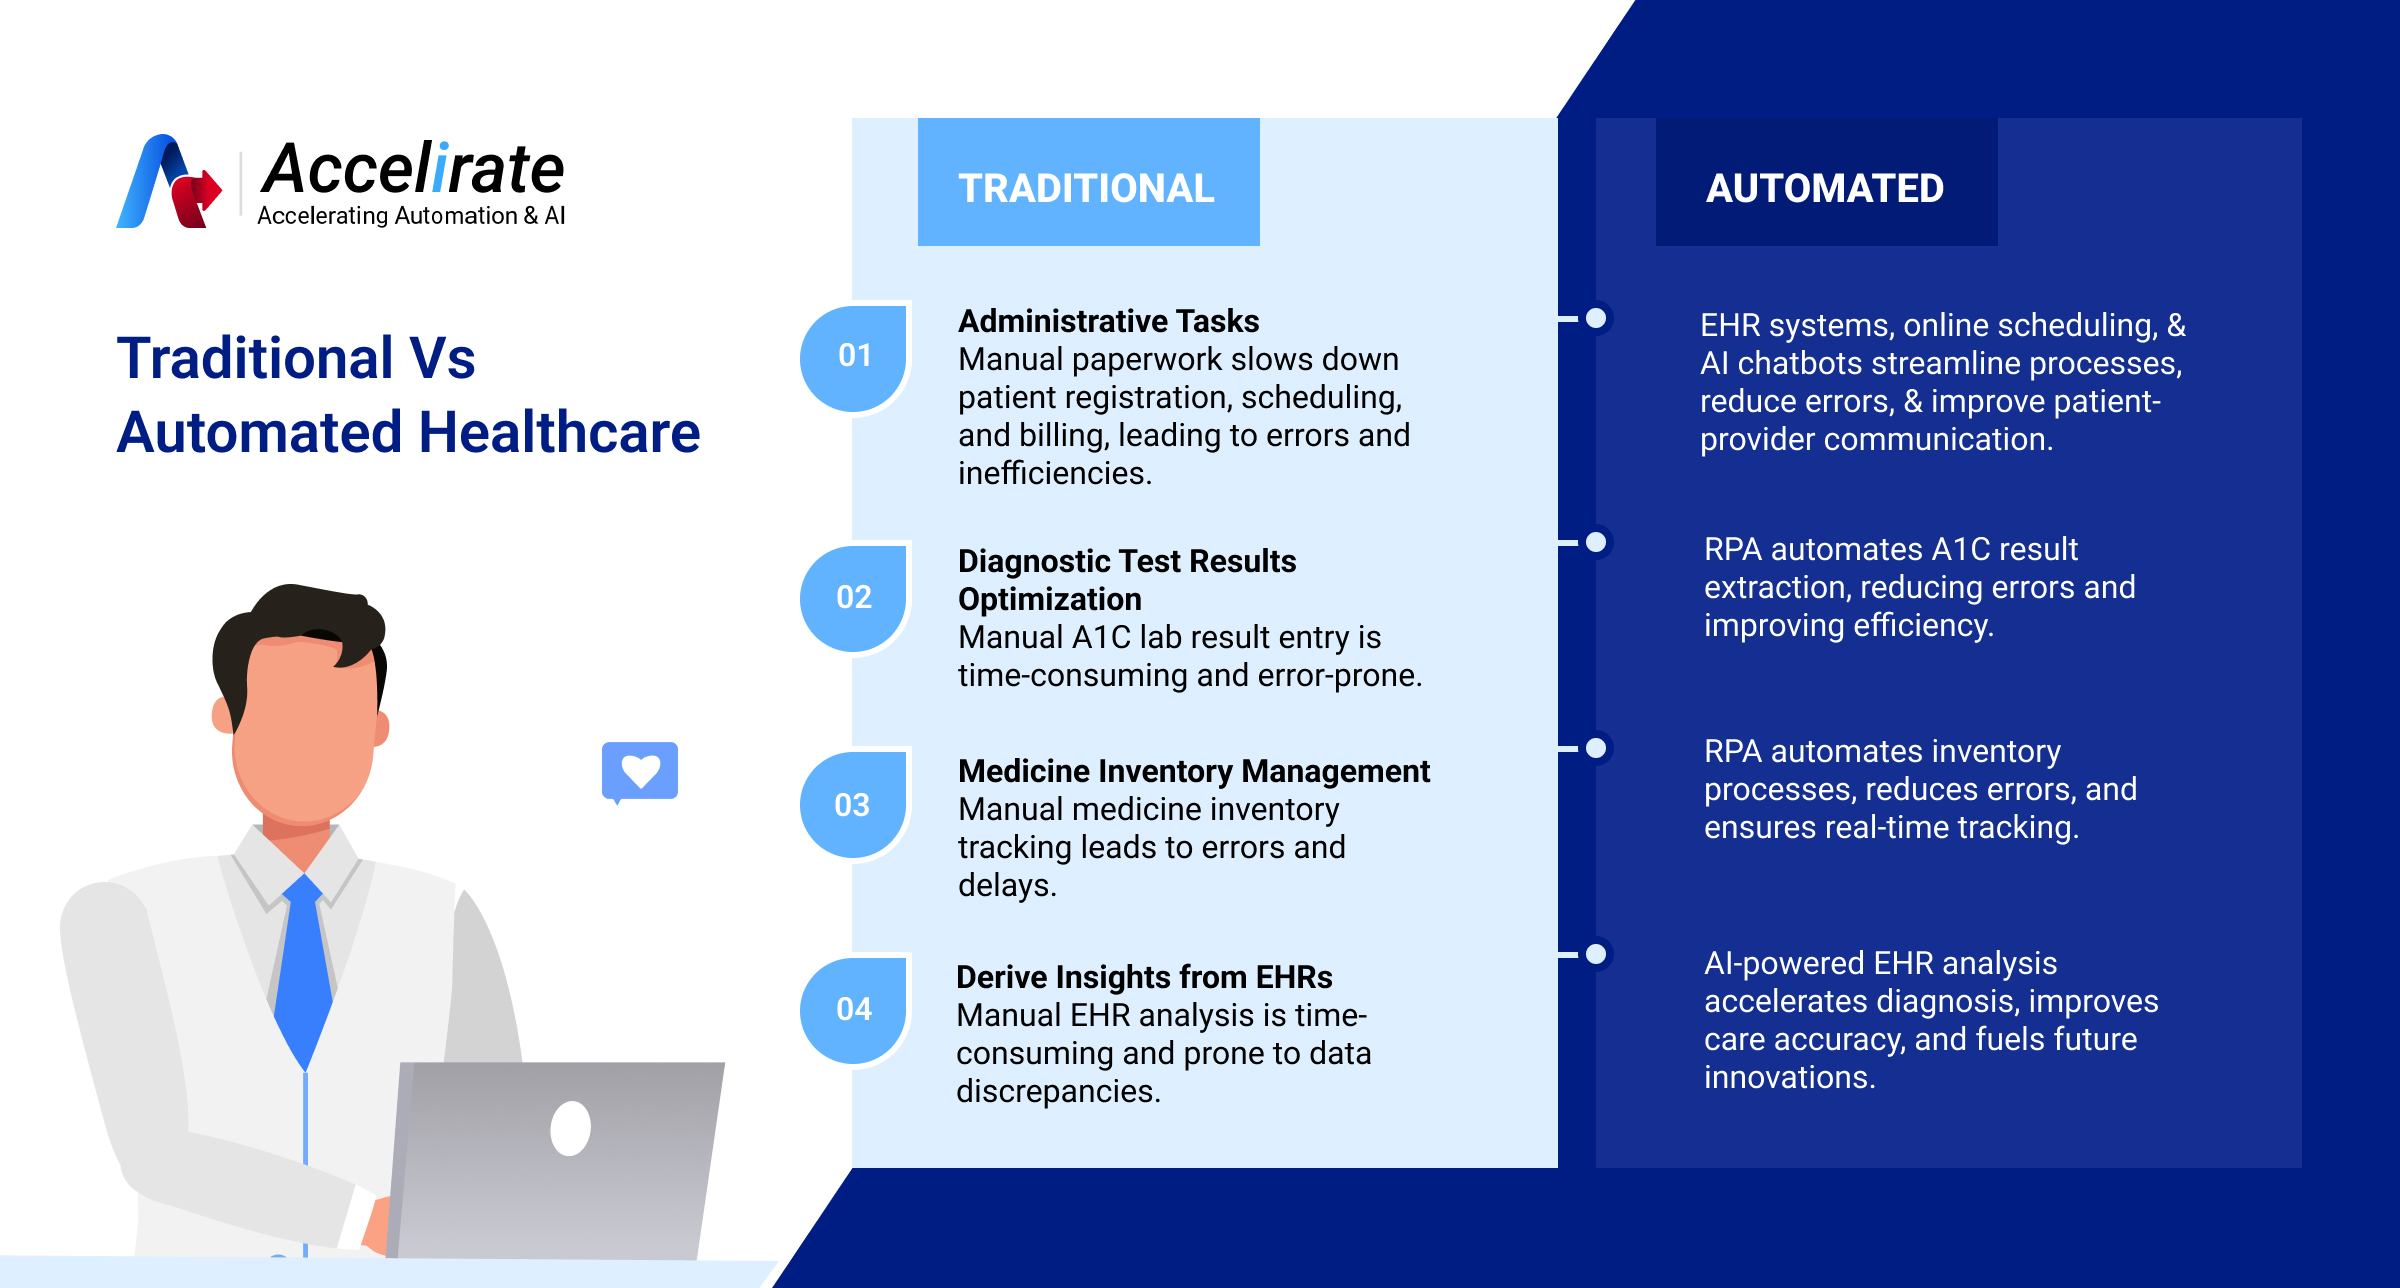 Automated Healthcare Processes